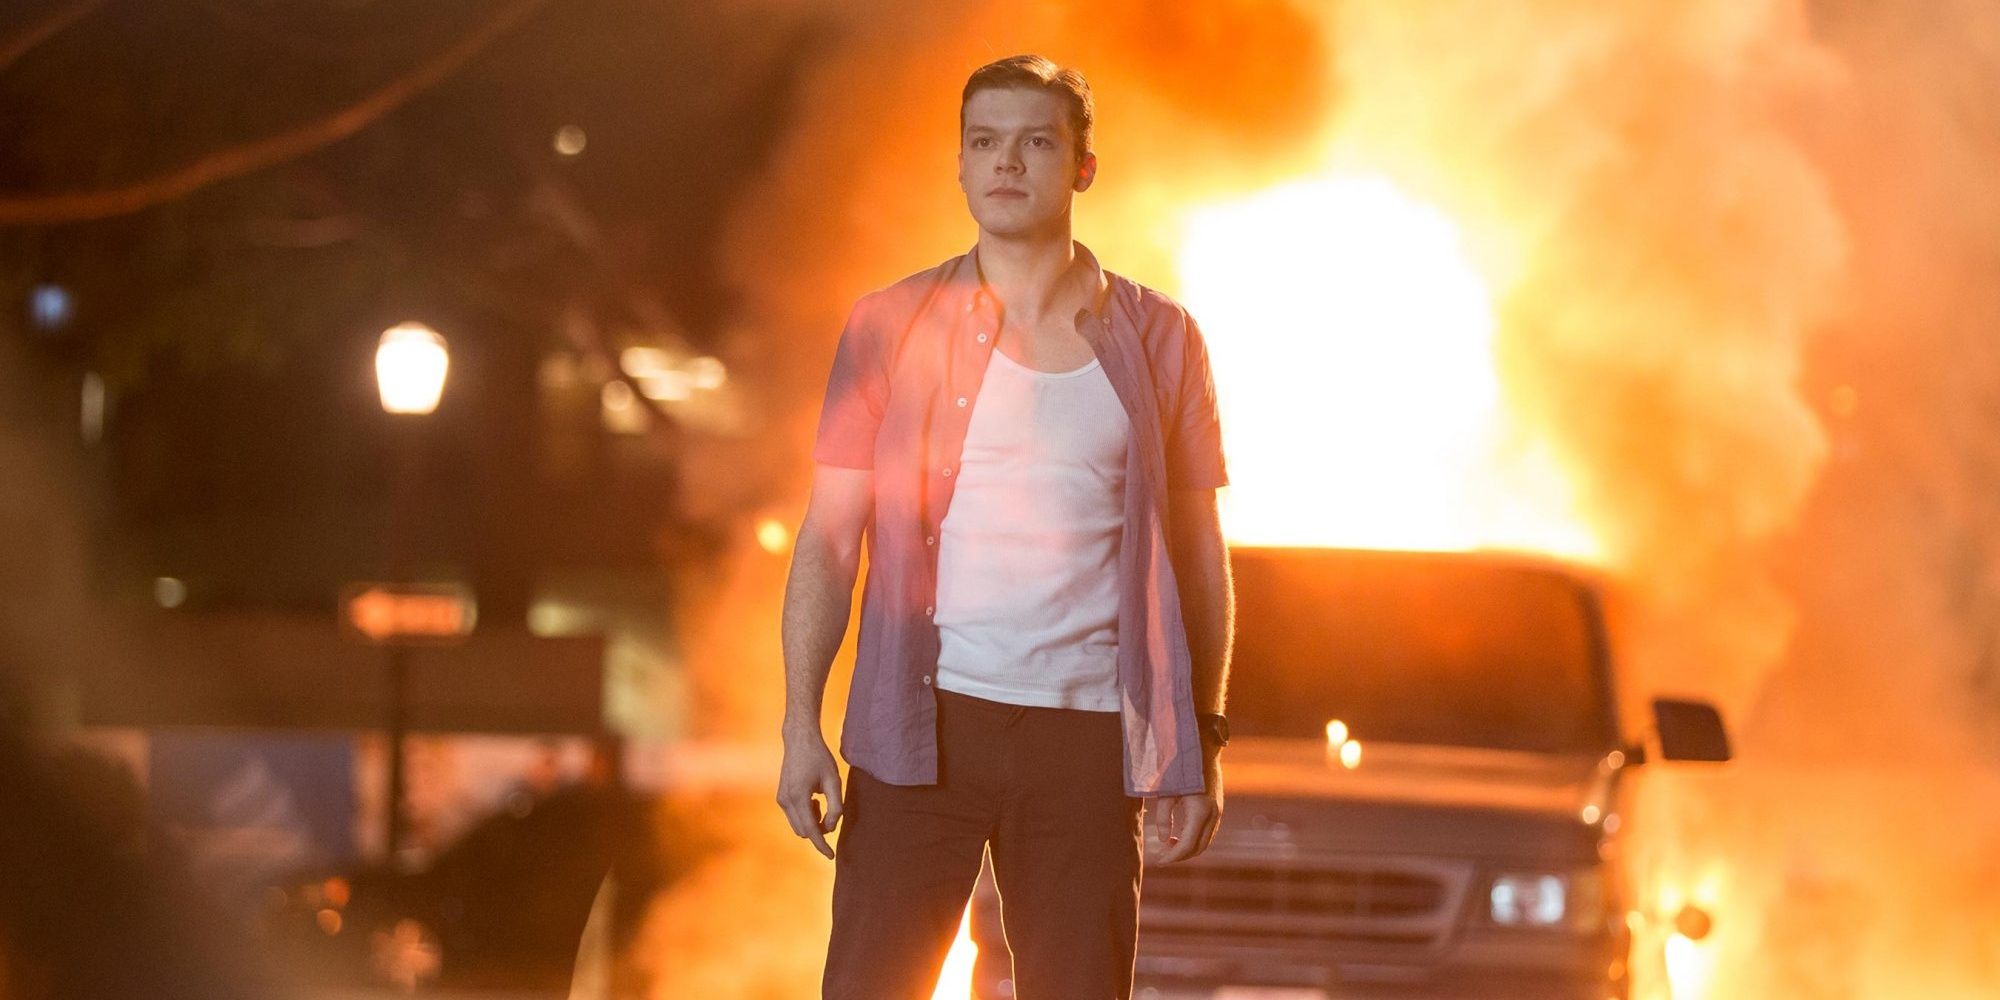 Ian blowing up the van in Shameless